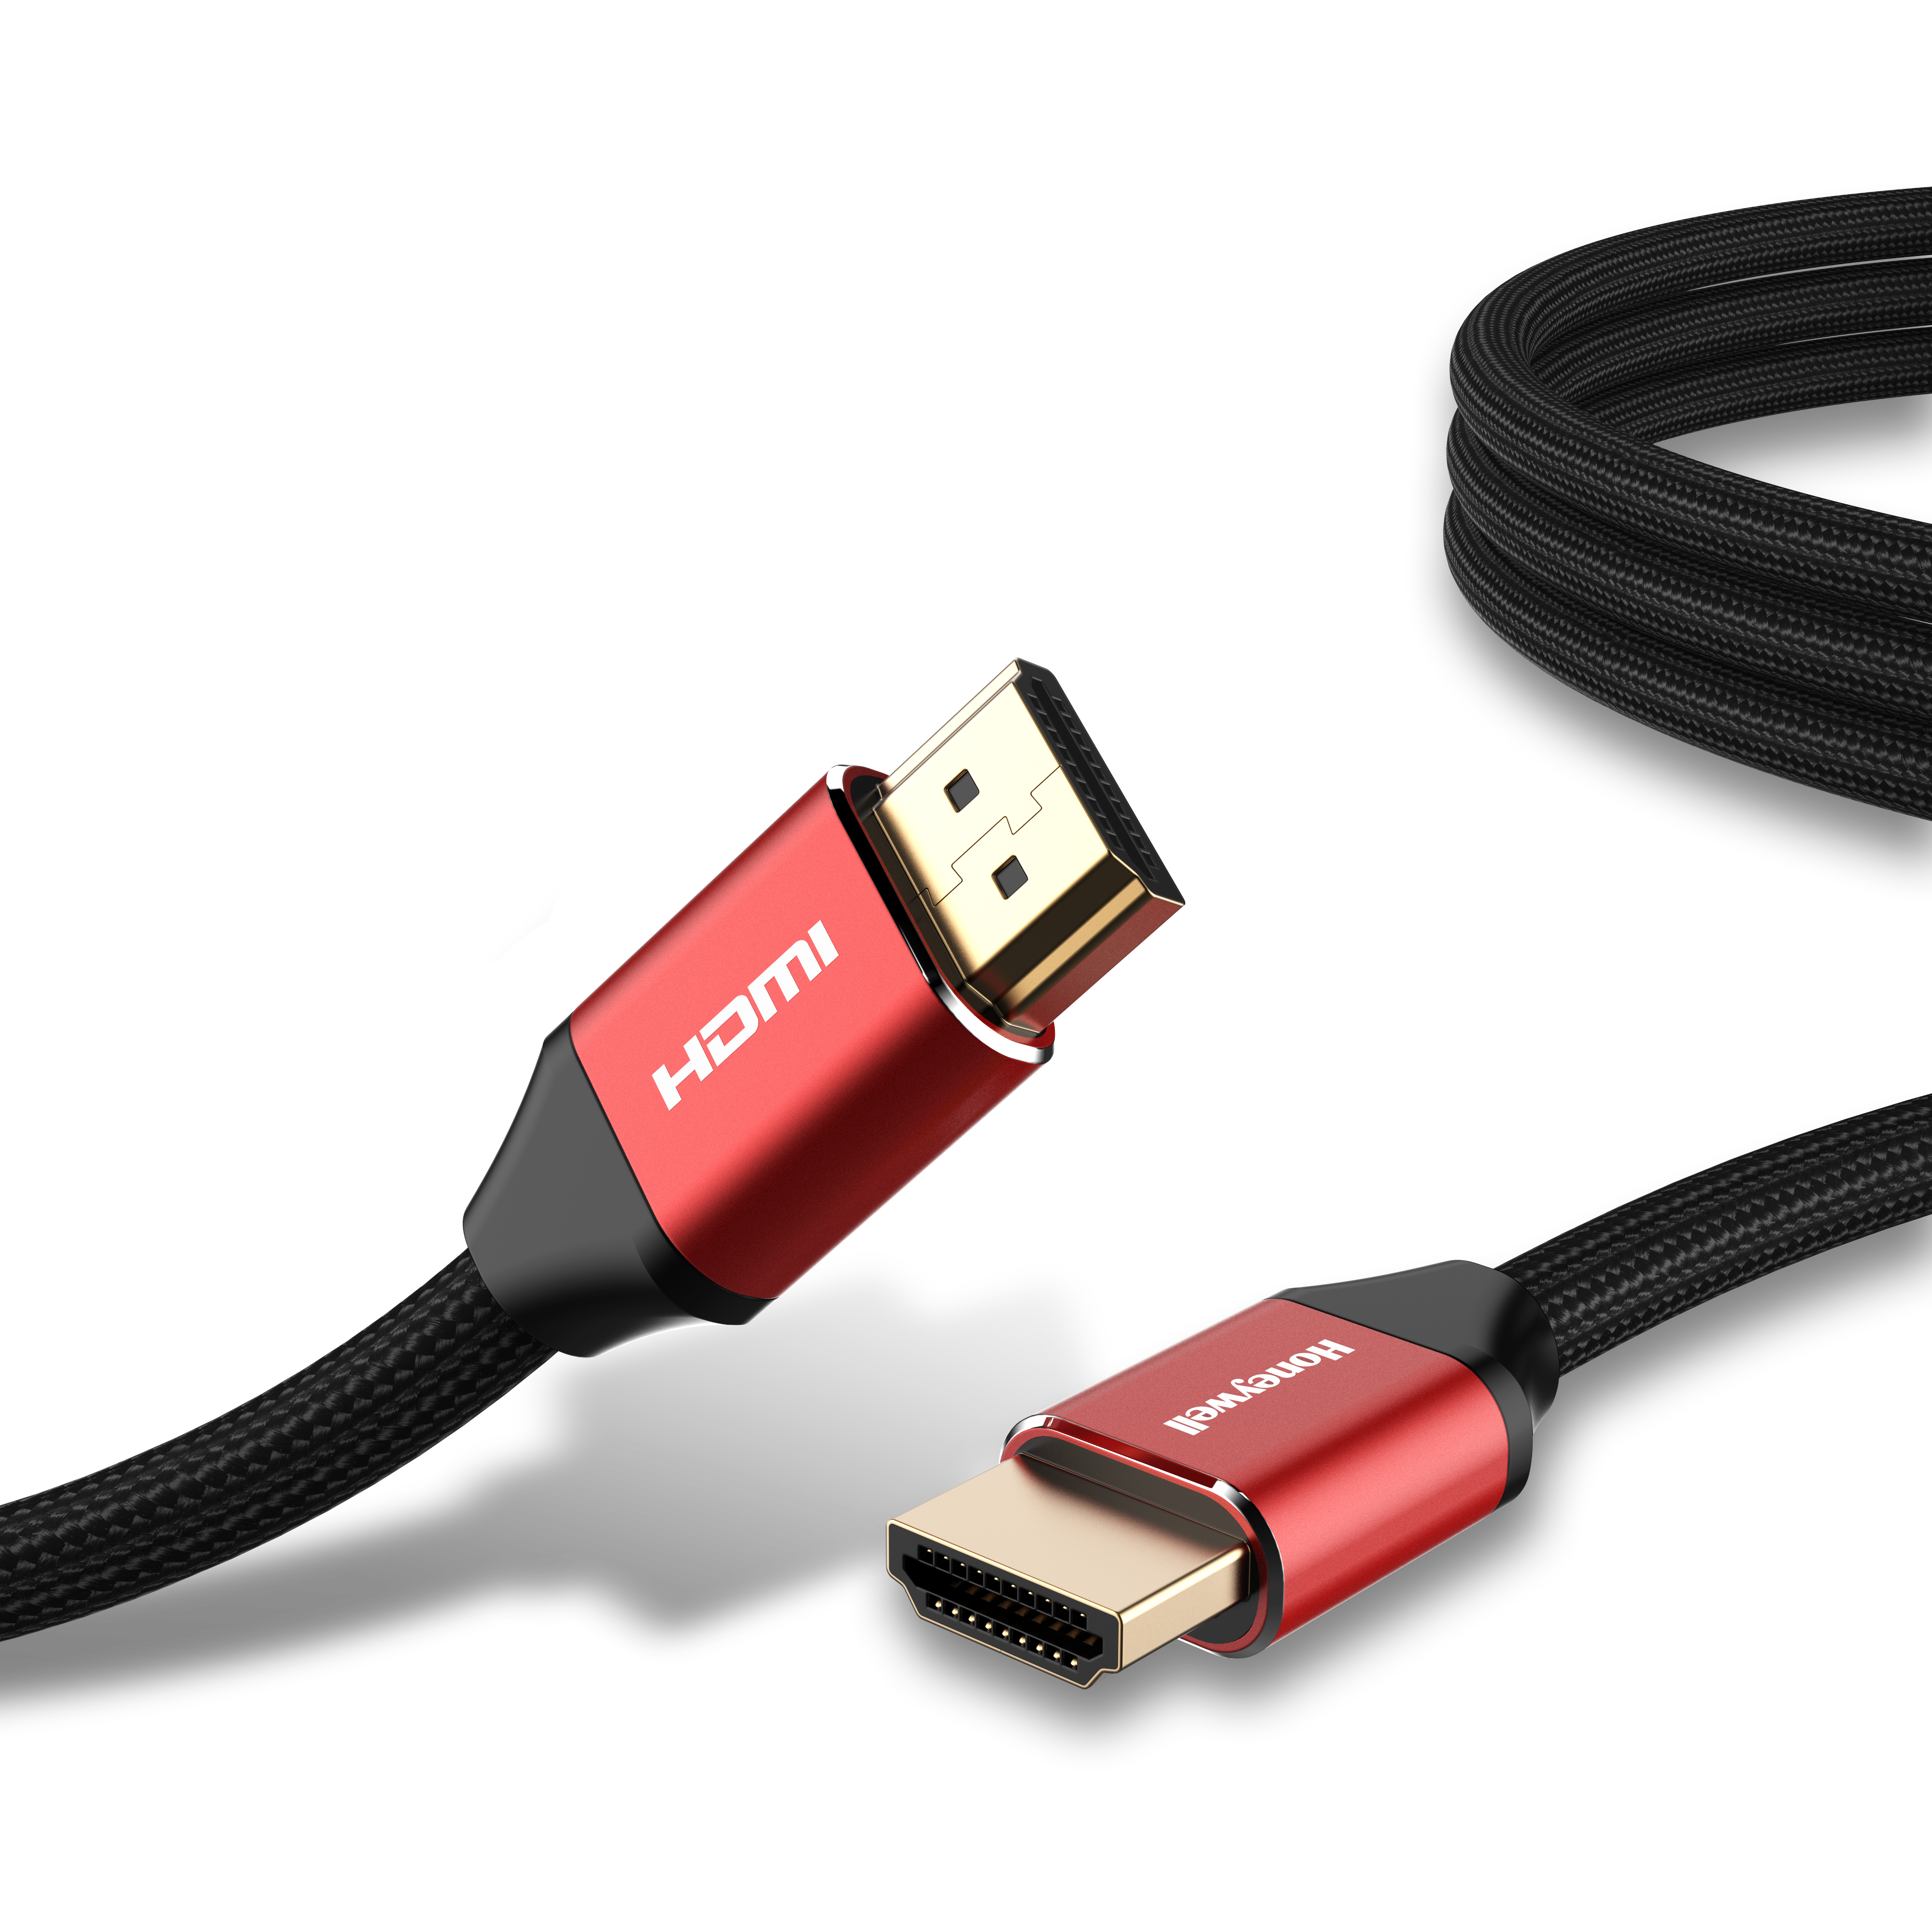 Honeywell HDMI Cable 2.1 with Ethernet- 5 Meters